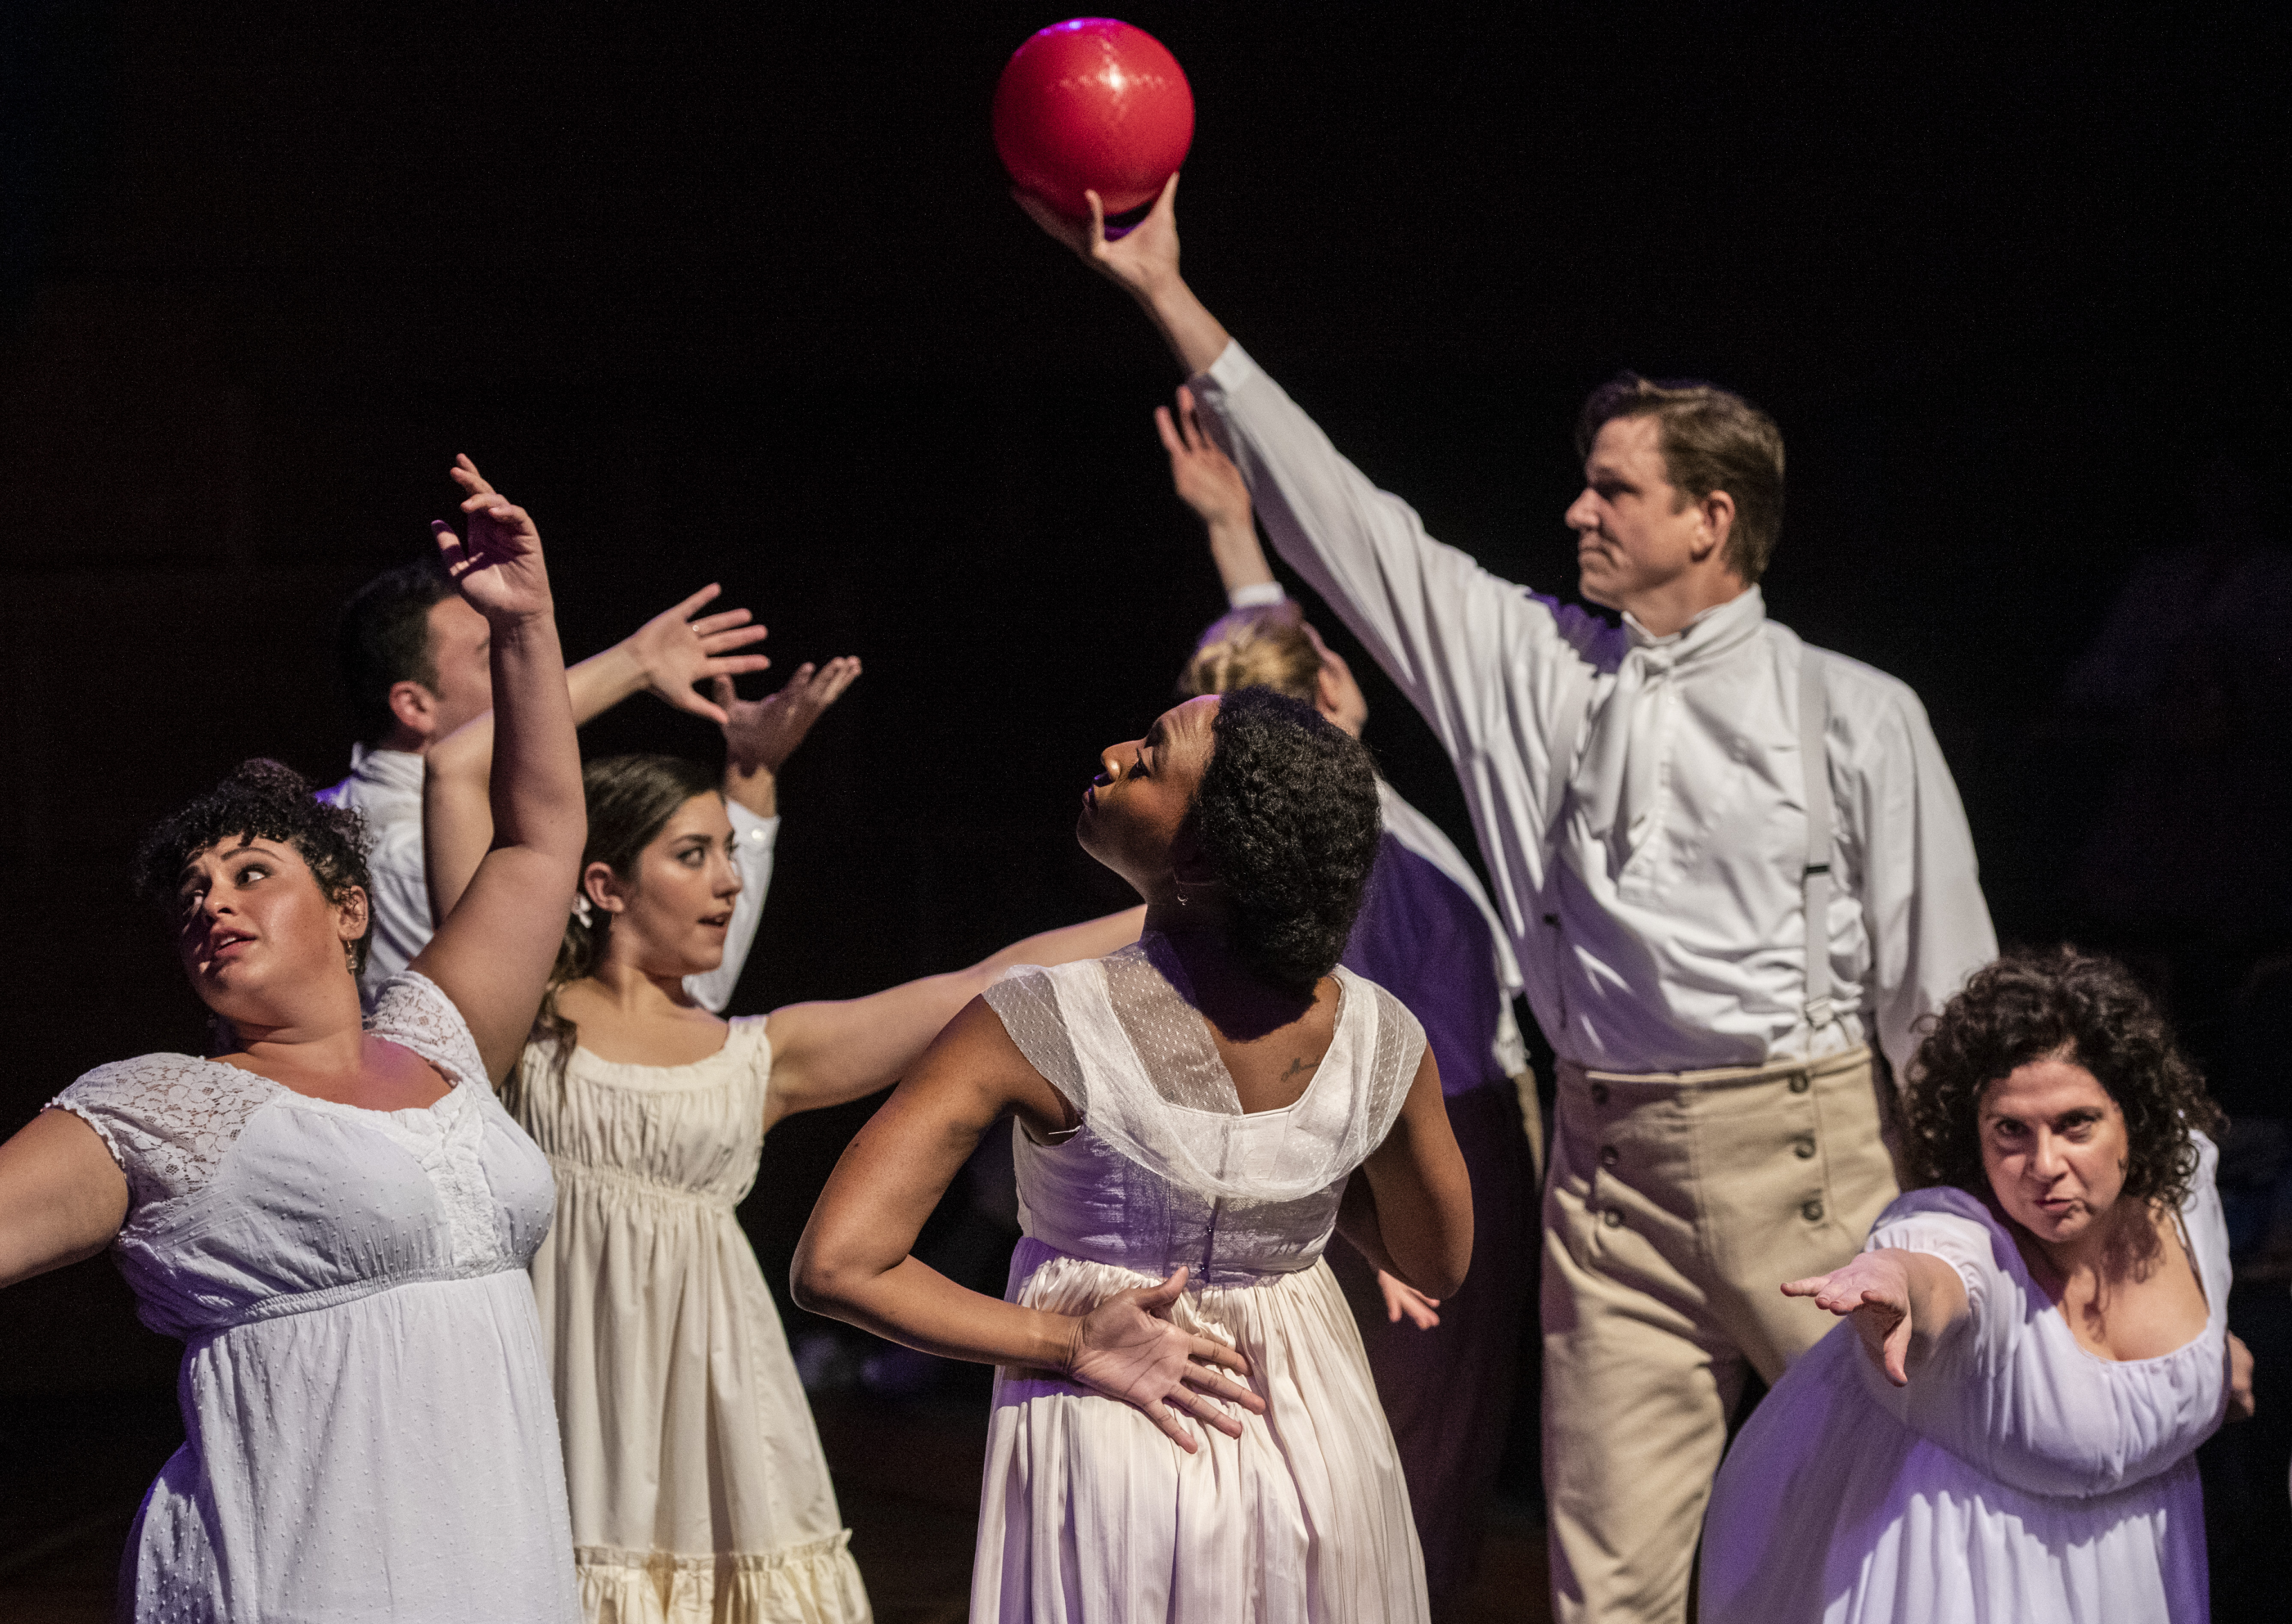 Actor Andrew William Smith proudly holds the red ball high in his role as sister Mary in the The Public's 'Pride and Prejudice,' and who knows what the others are up to? (Photo: Michael Henninger)